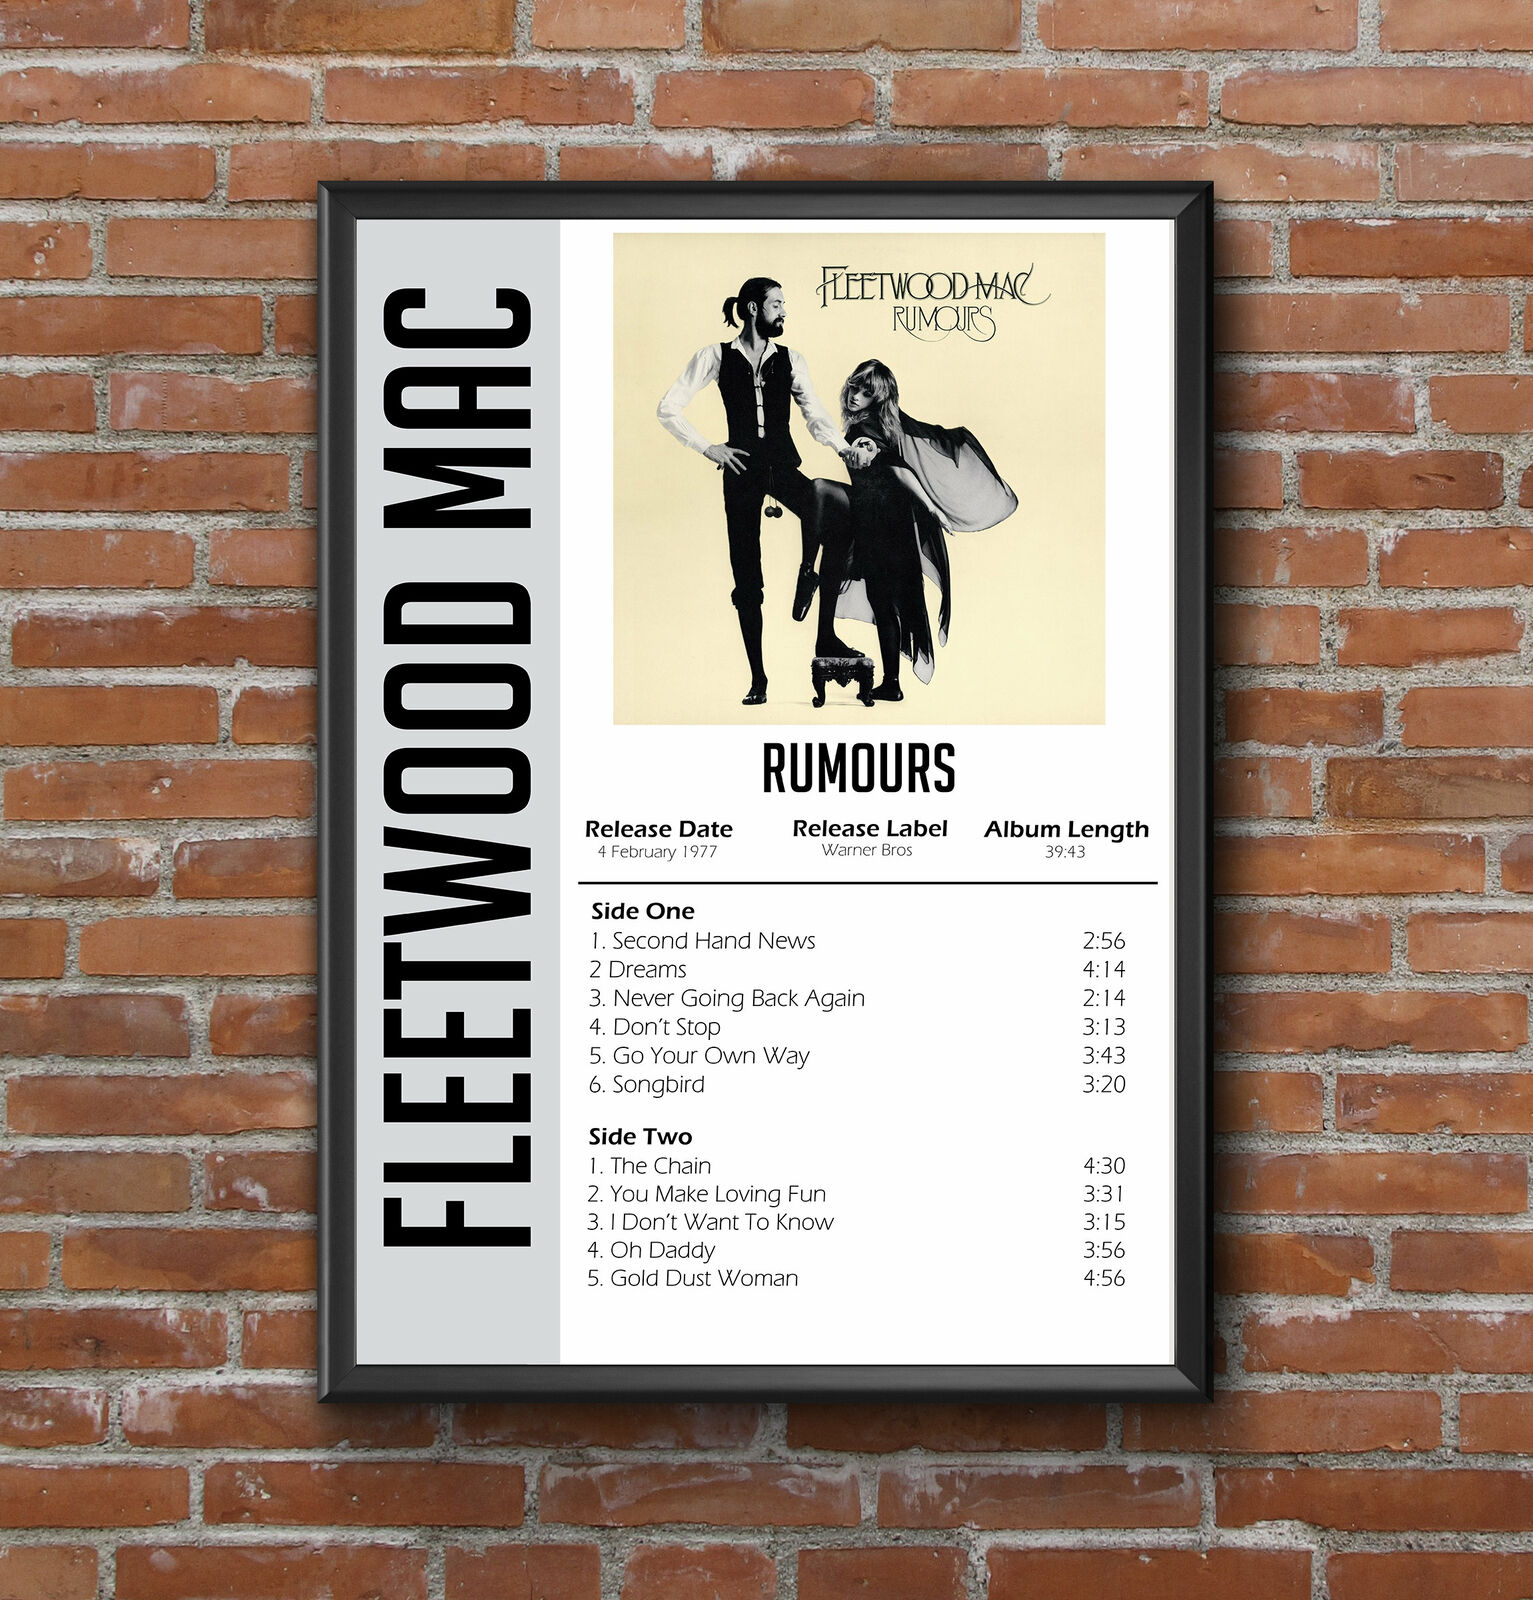 Fleetwood Mac - Rumours Inspired Album Cover Poster Print Great Music Fan Gift